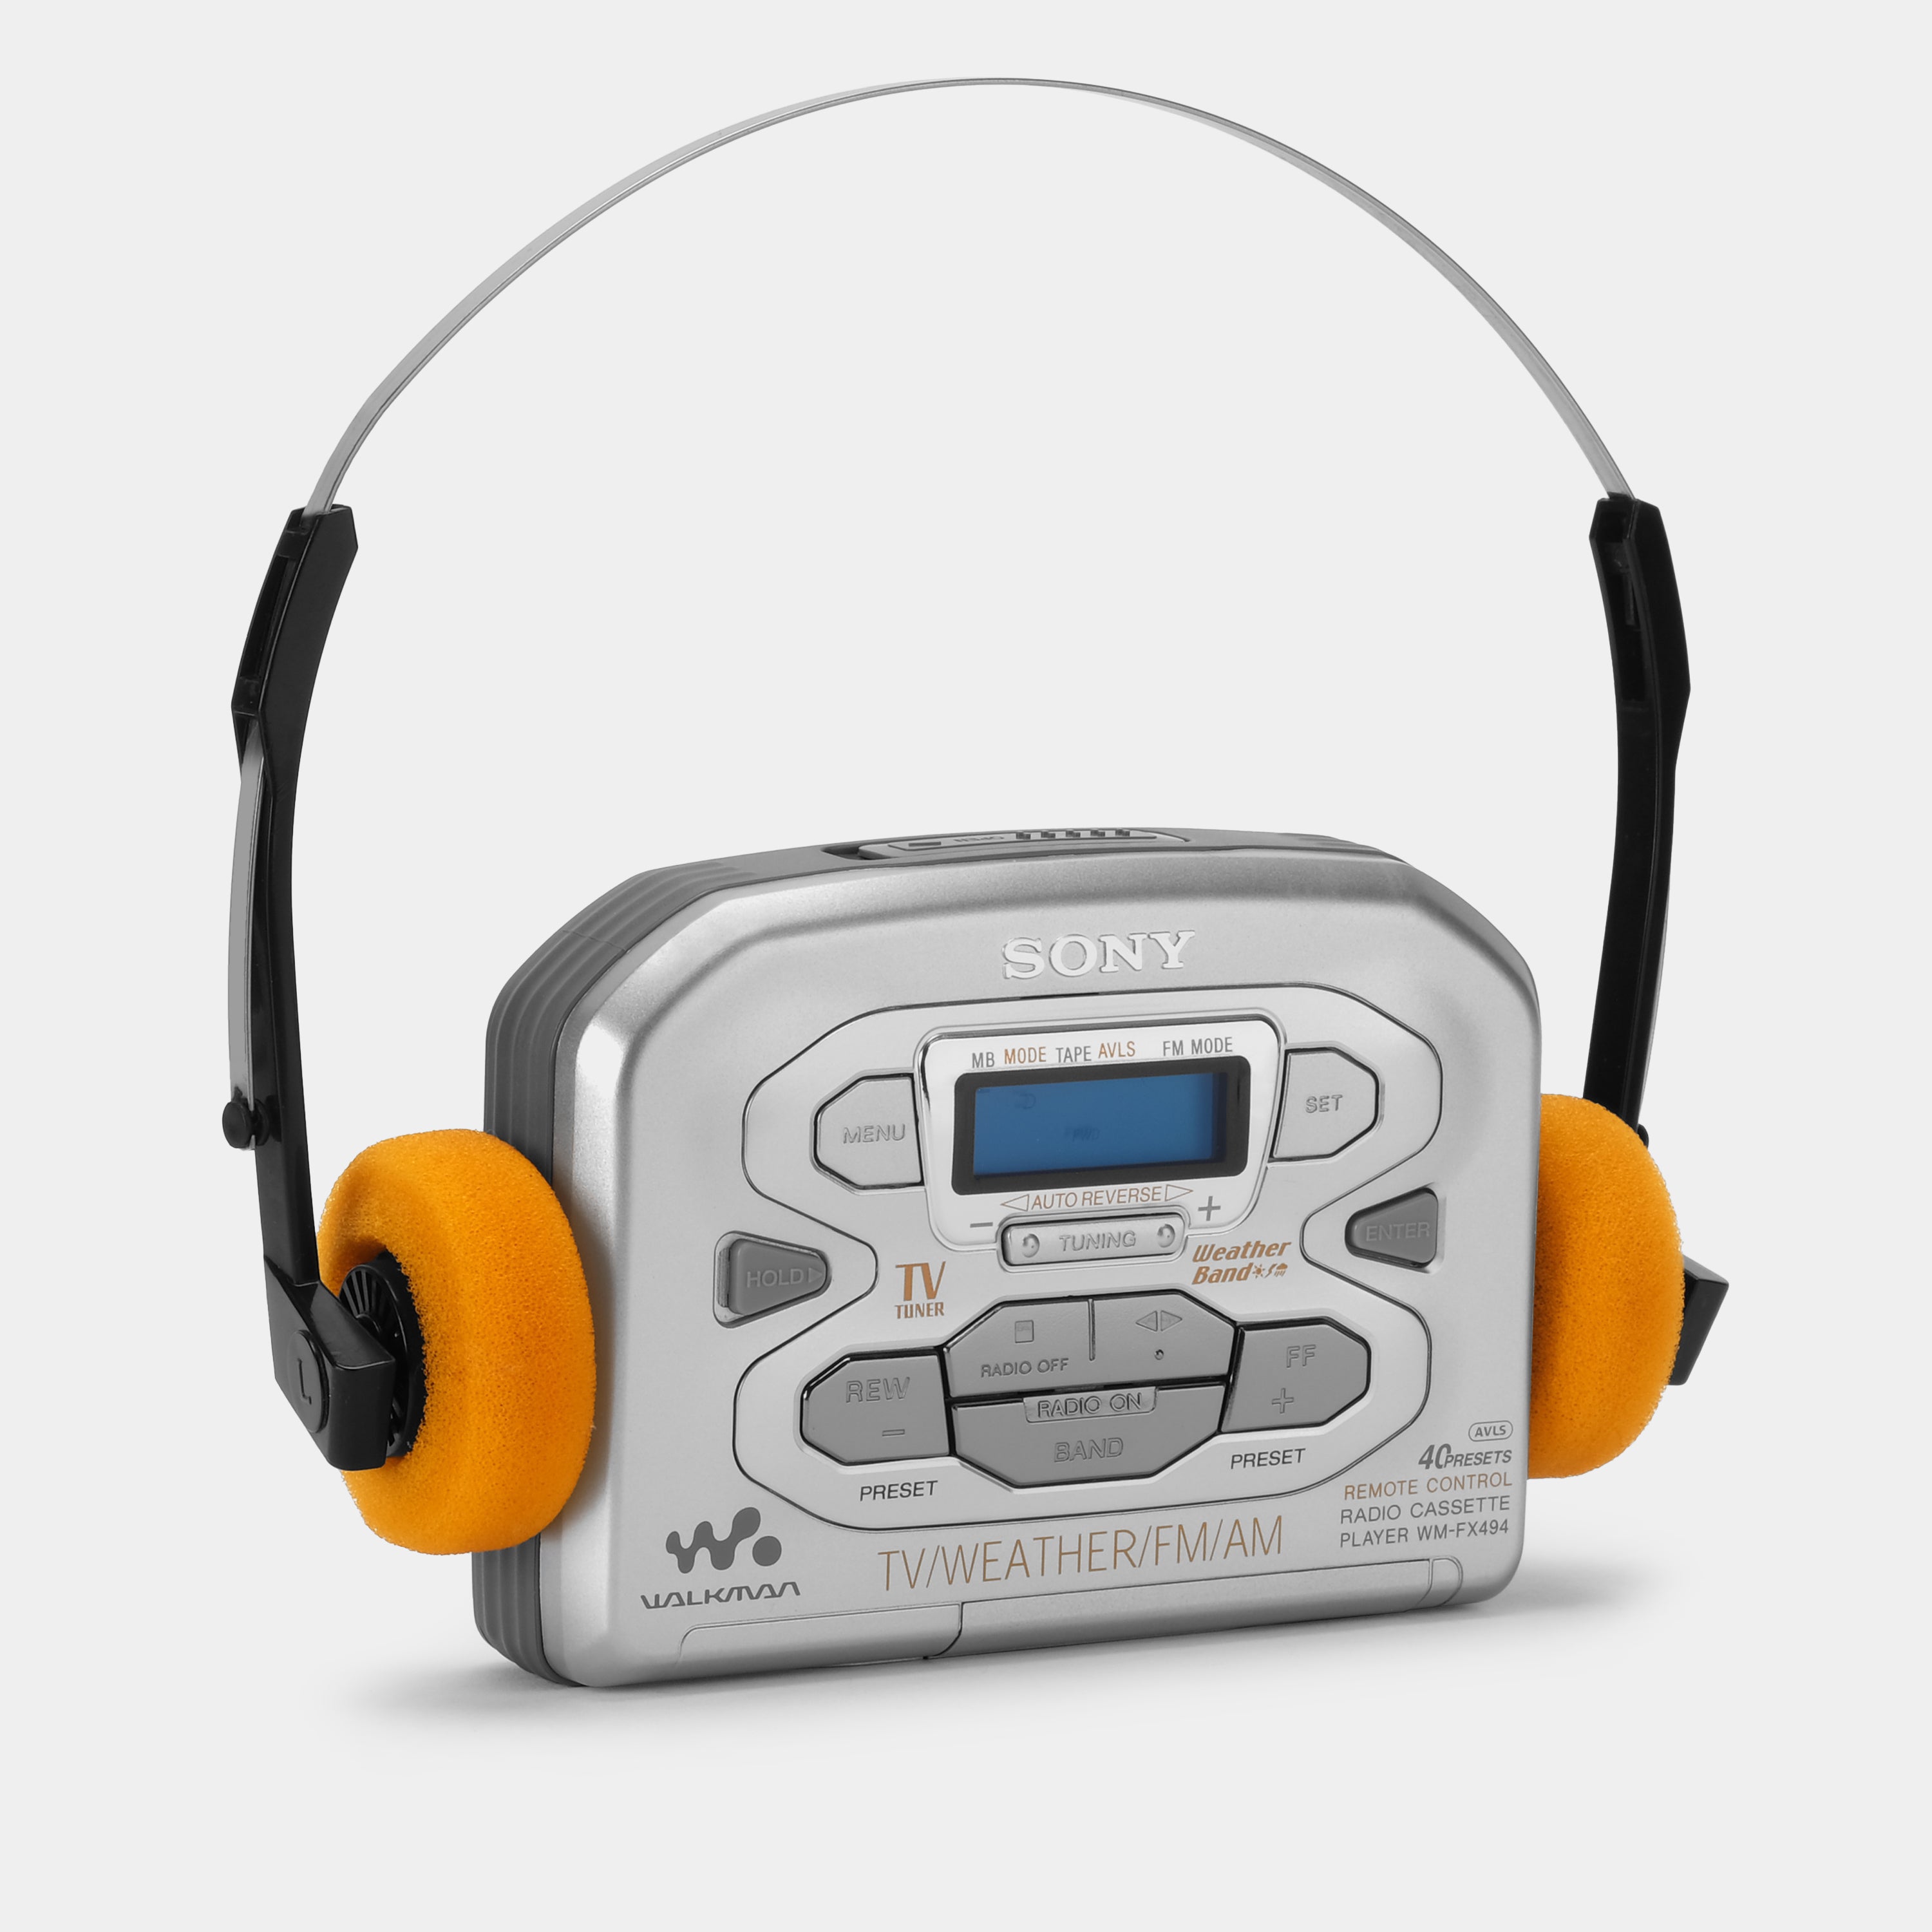  Portable Walkman Cassette Player: with 16GB SD Card Vintage  Cassette Tape Player,Convert Walkman Tape Cassettes with Recorder,Big  Speaker,Earphone Jack,Built-in Microphone for Home,Park White : Electronics